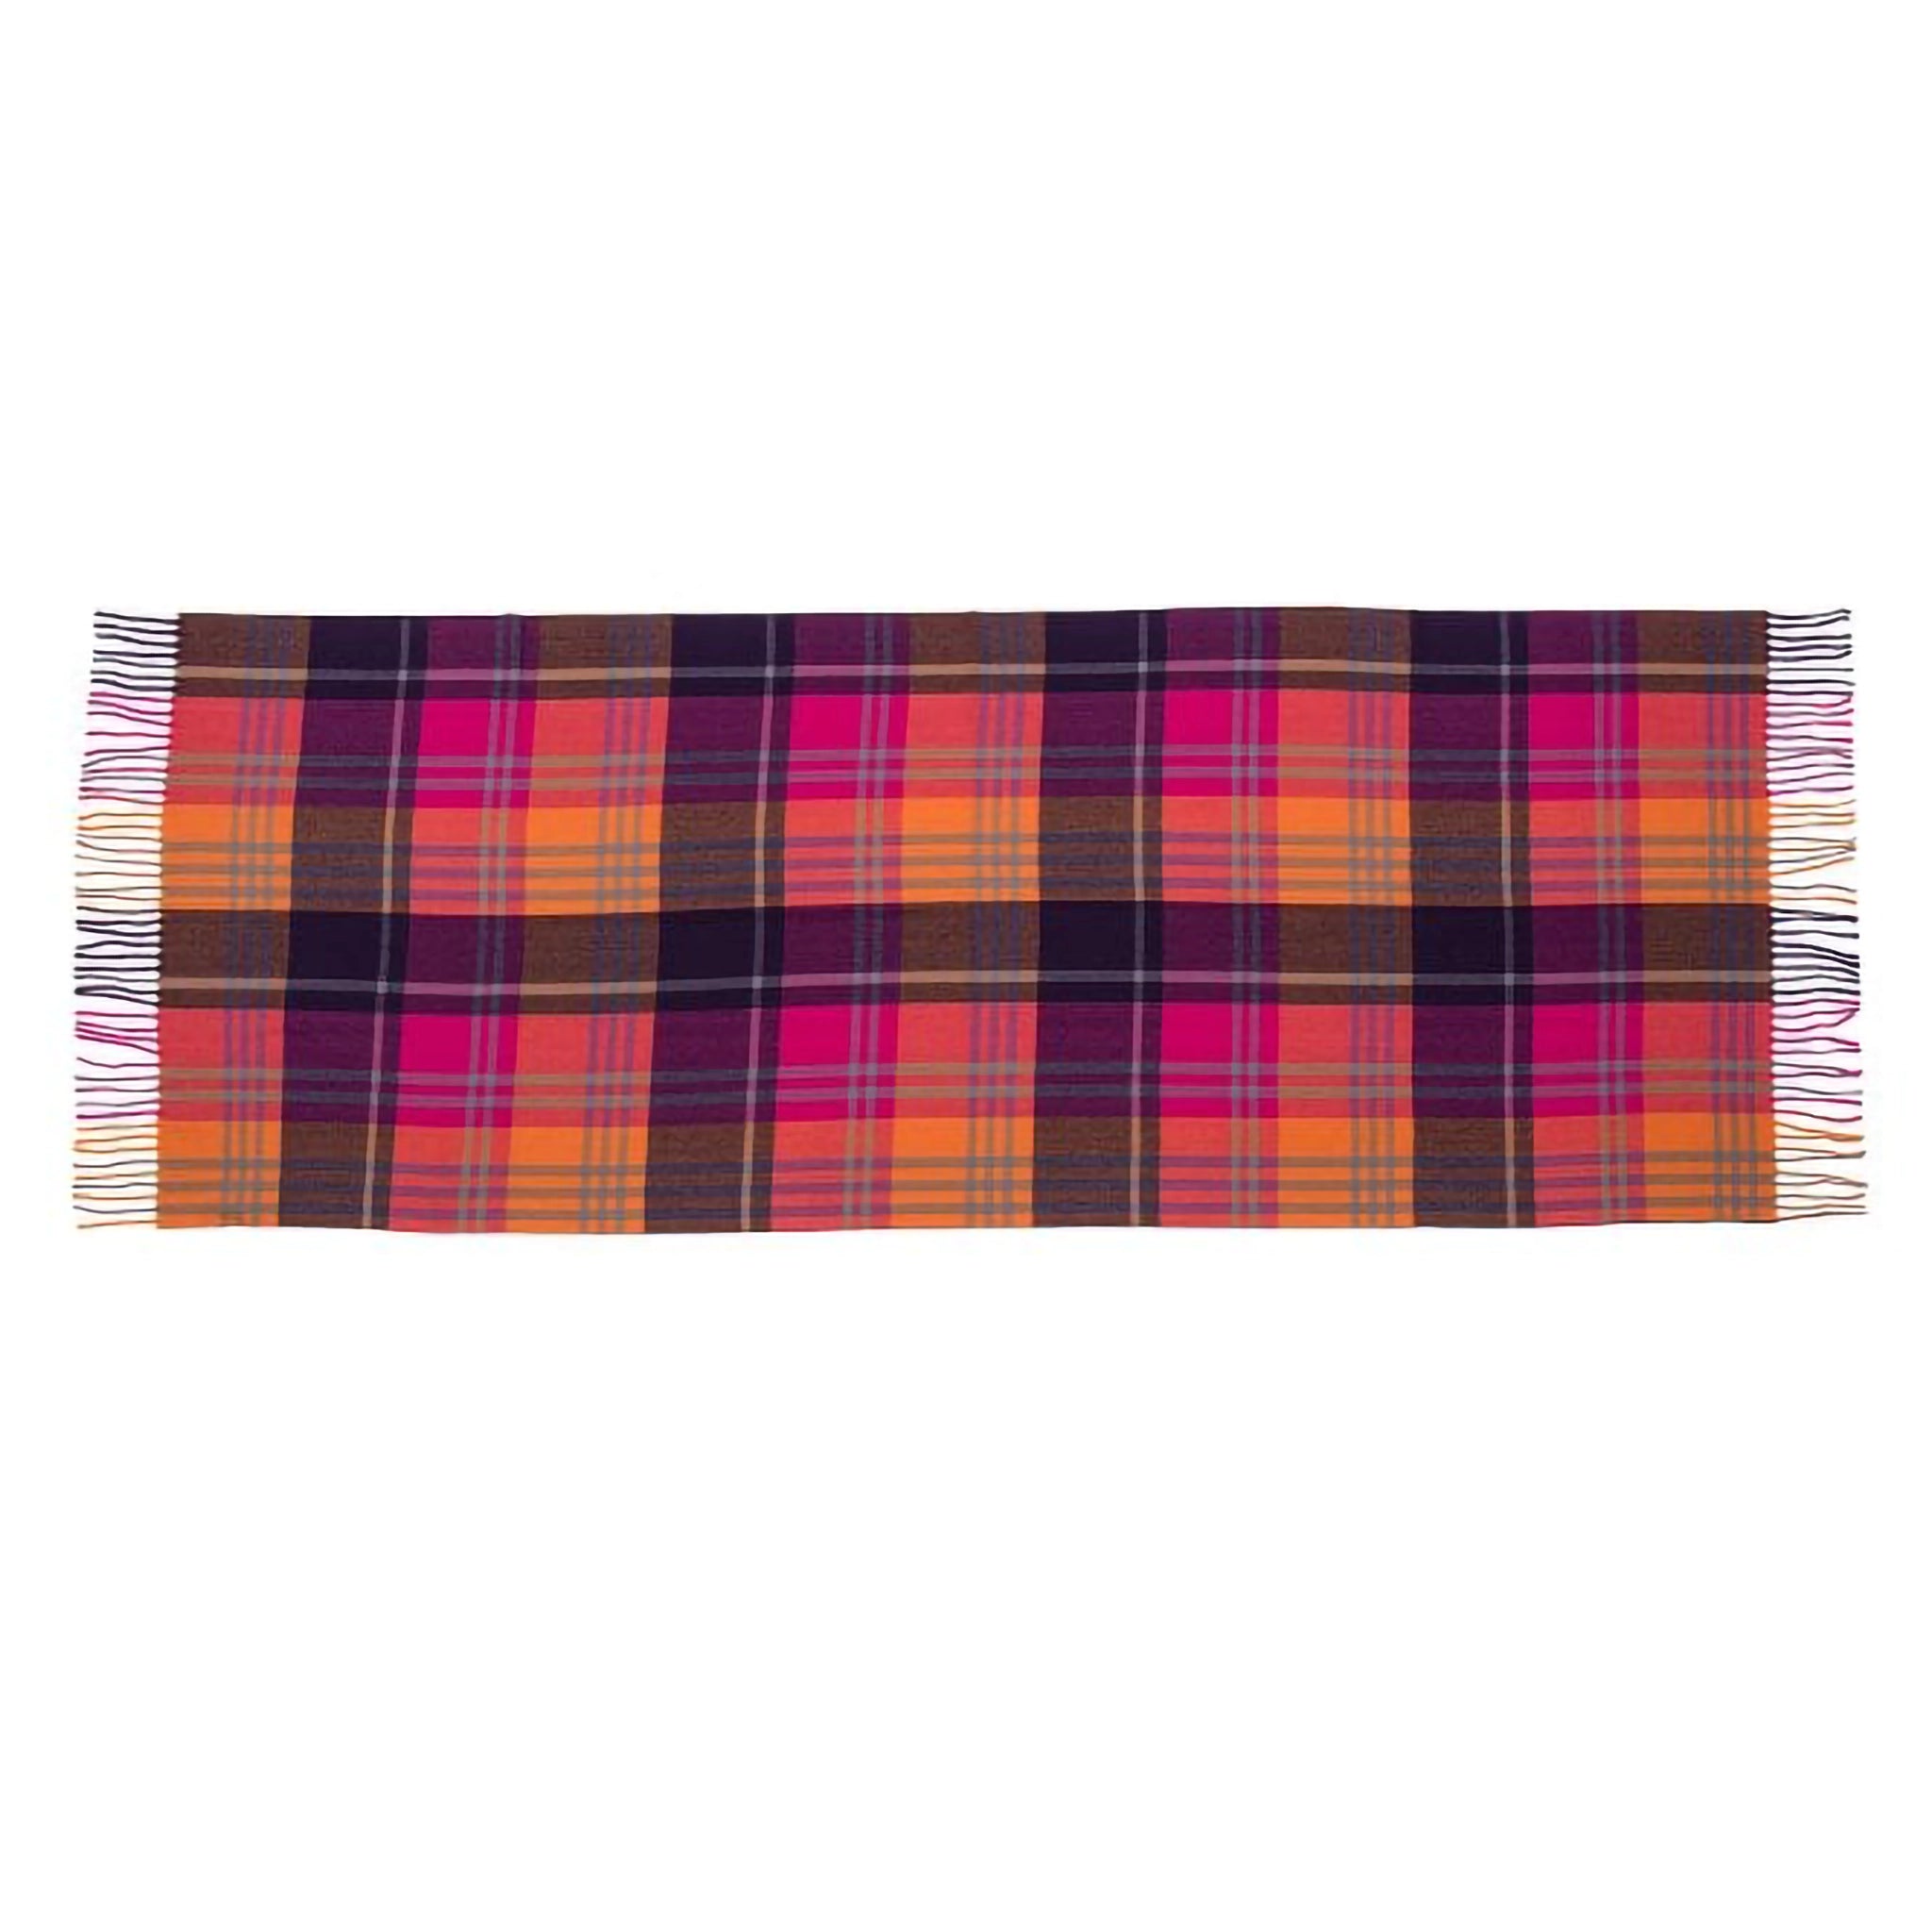 Detailed image of checked scarf in pink, purple and orange, with twist tassel trim